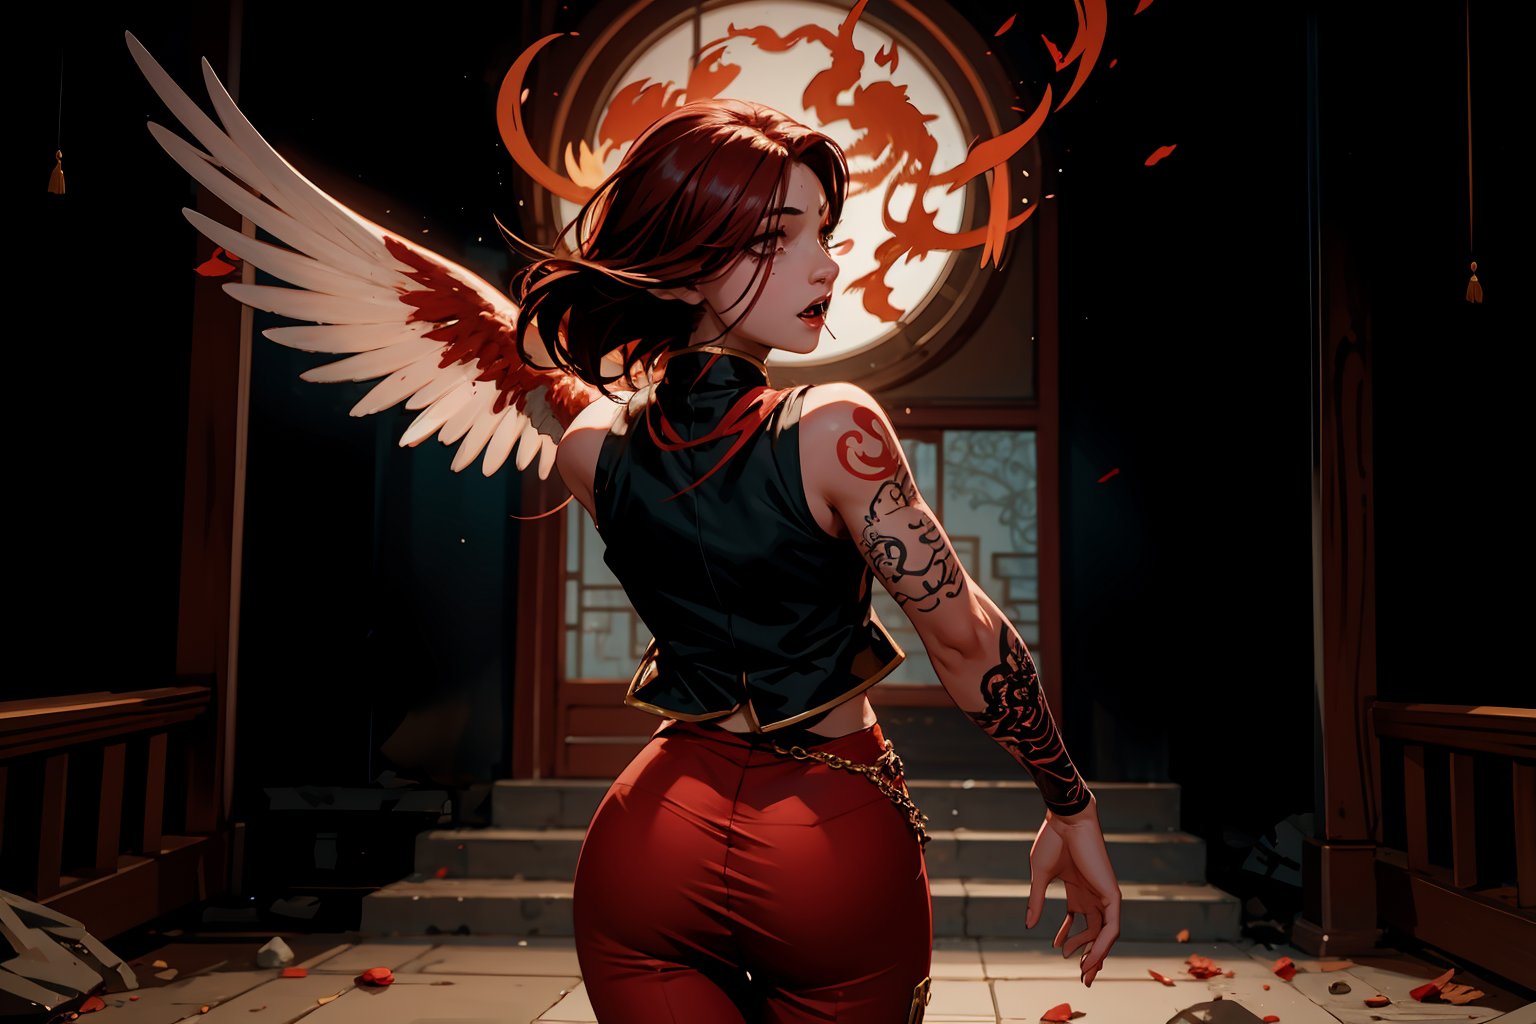 Chinese mythology, solo, 1female, monster_girl, short hair, dark red hair, (facial marks), fierce face, evil face, fangs, sexy lips, (pointed ears), (dark skin), strong body, (phoenix tattoo), (a single wing behind:1.2), dark red vest, long pants, a heavenly guardian, its normally radiant aura now dimmed by mortal wounds, bursts into the grand hall with frantic urgency. The once-stalwart warrior's usually unyielding expression is replaced by a look of desperation as it rushes to convey crucial information to the gathered officials. In a chaotic flurry of motion, the injured god stumbles forward, its usually immaculate attire now disheveled and bloodied, dynamic pose, (flying:1.2), (from behind:1.2), Chinese martial arts animation style